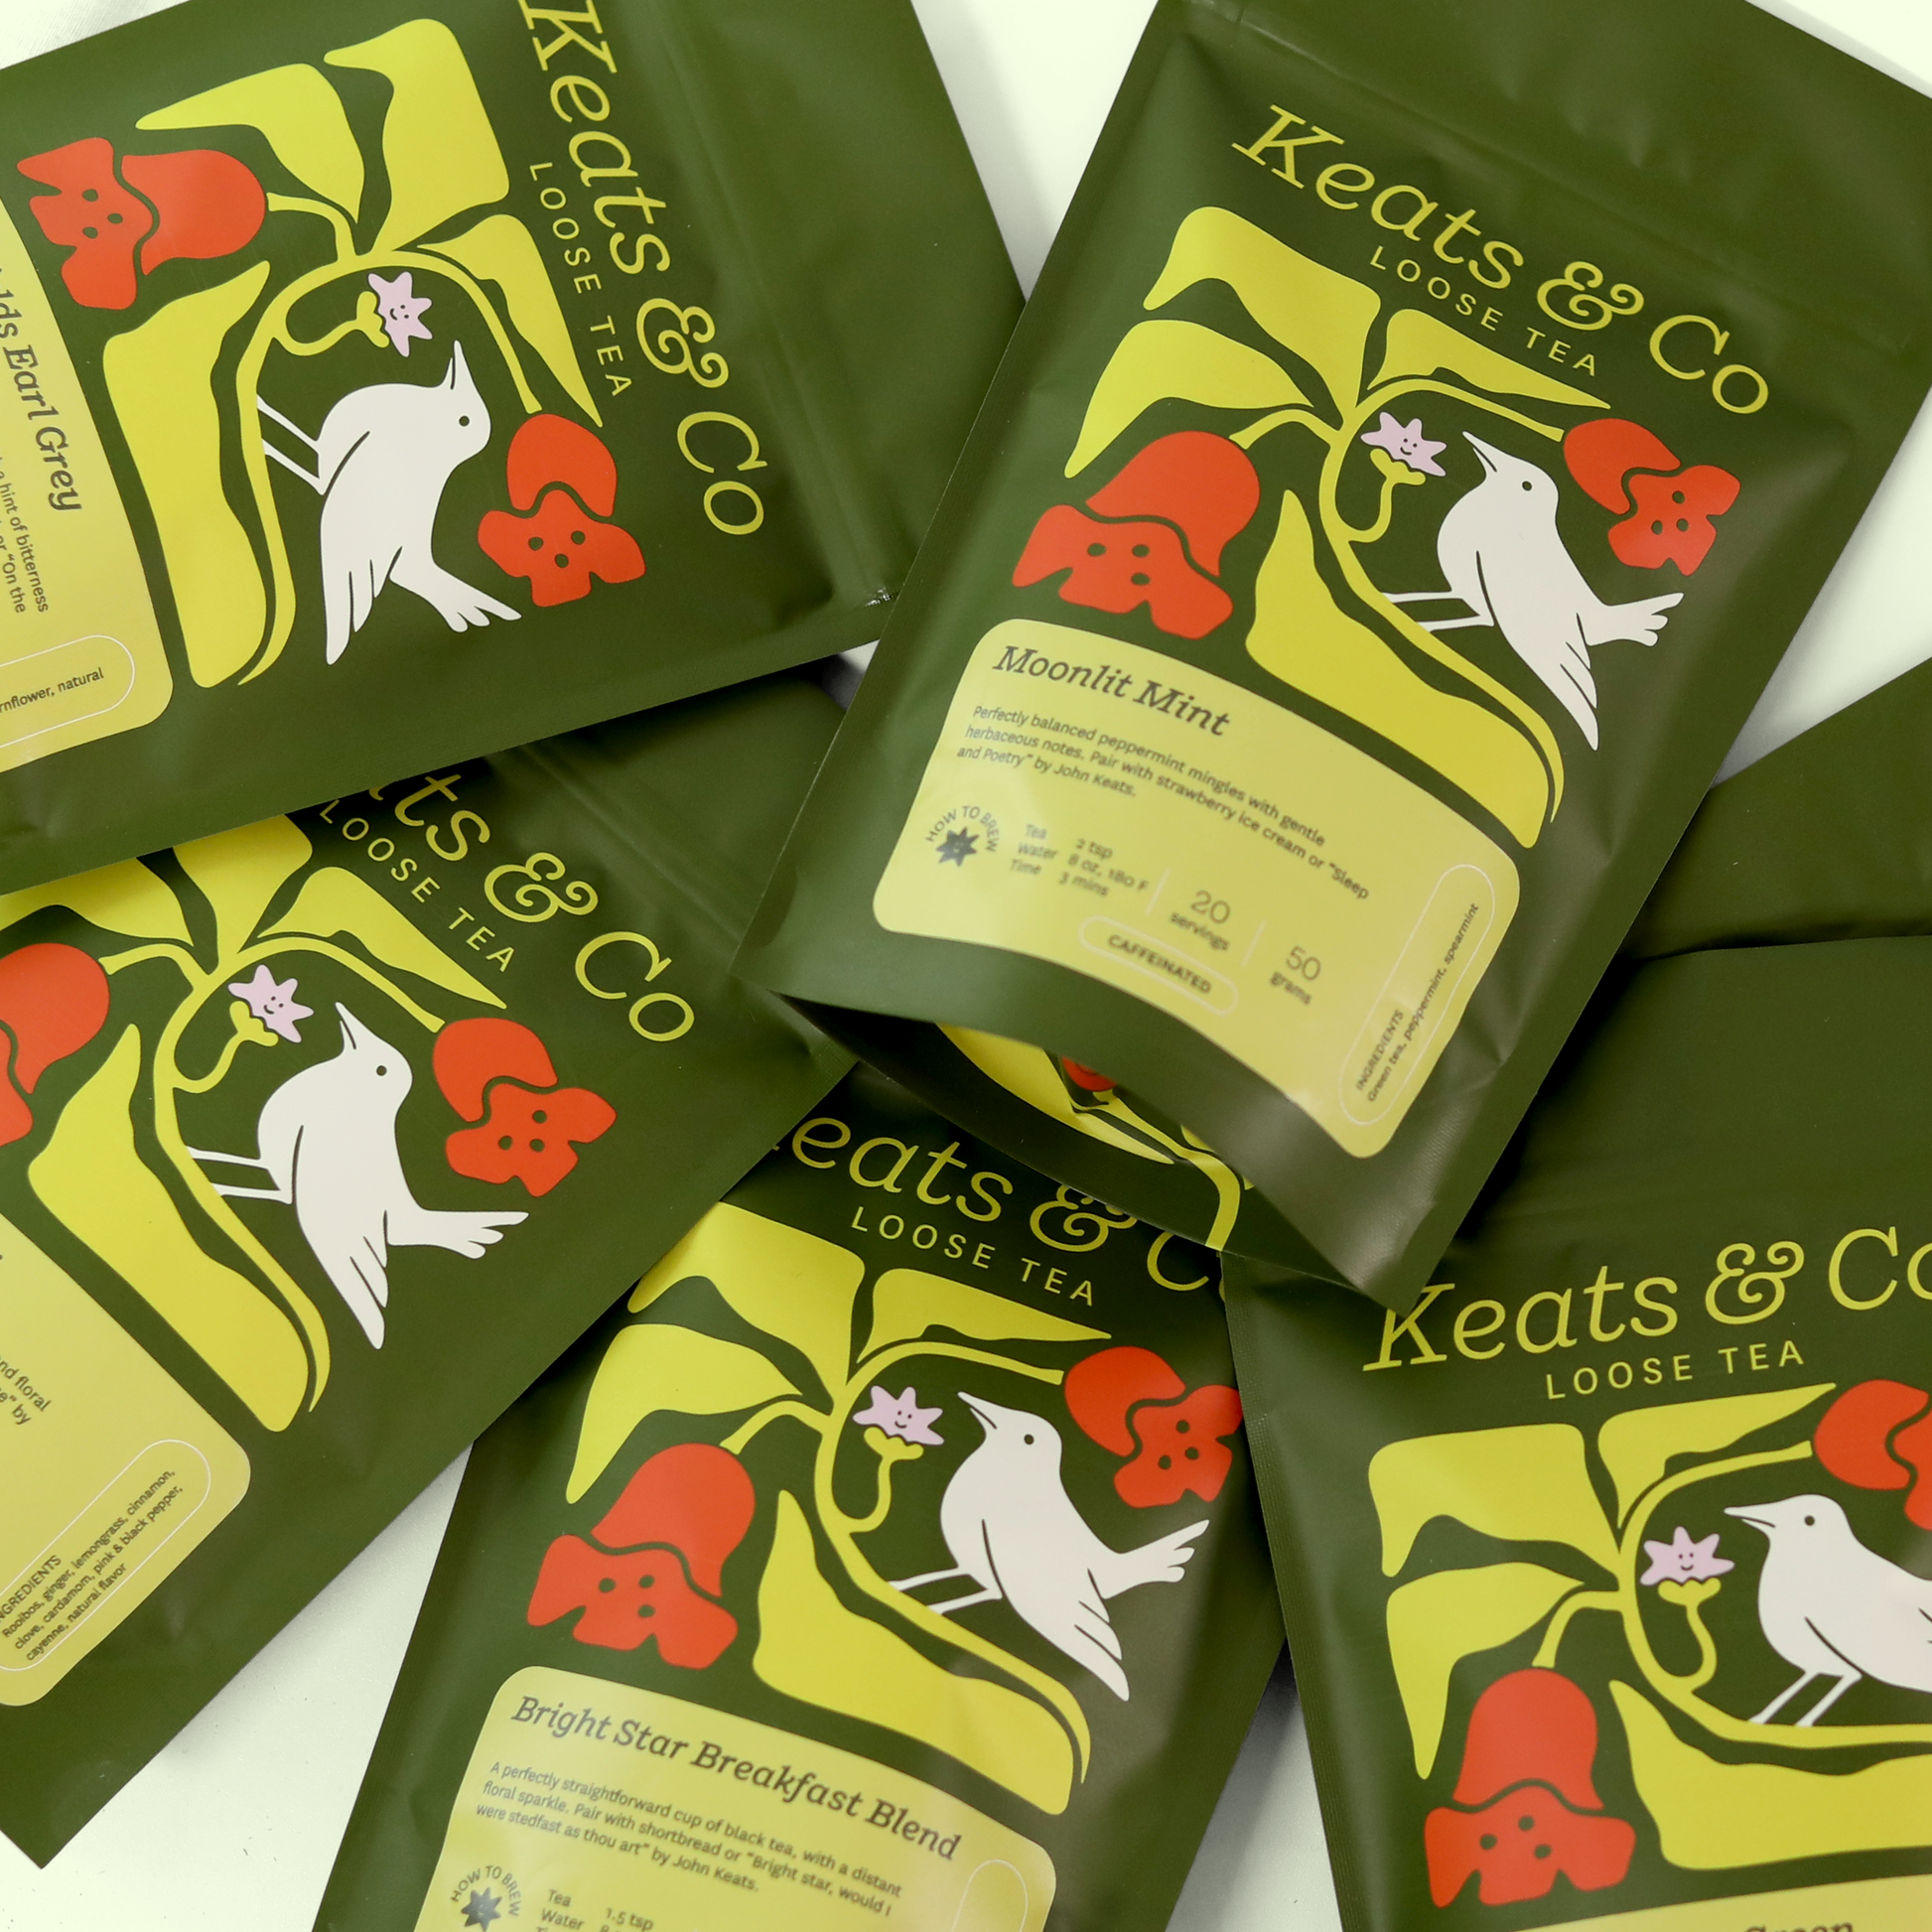 Several green and white tea packaging bags featuring an illustrated Nightingale logo and red floral accents are arranged to display the front and back labels. The bags contain loose leaf tea blends from Keats & Co. The front labels show the tea variety names, while the back labels provide additional product details and brewing instructions. A Good Store product.